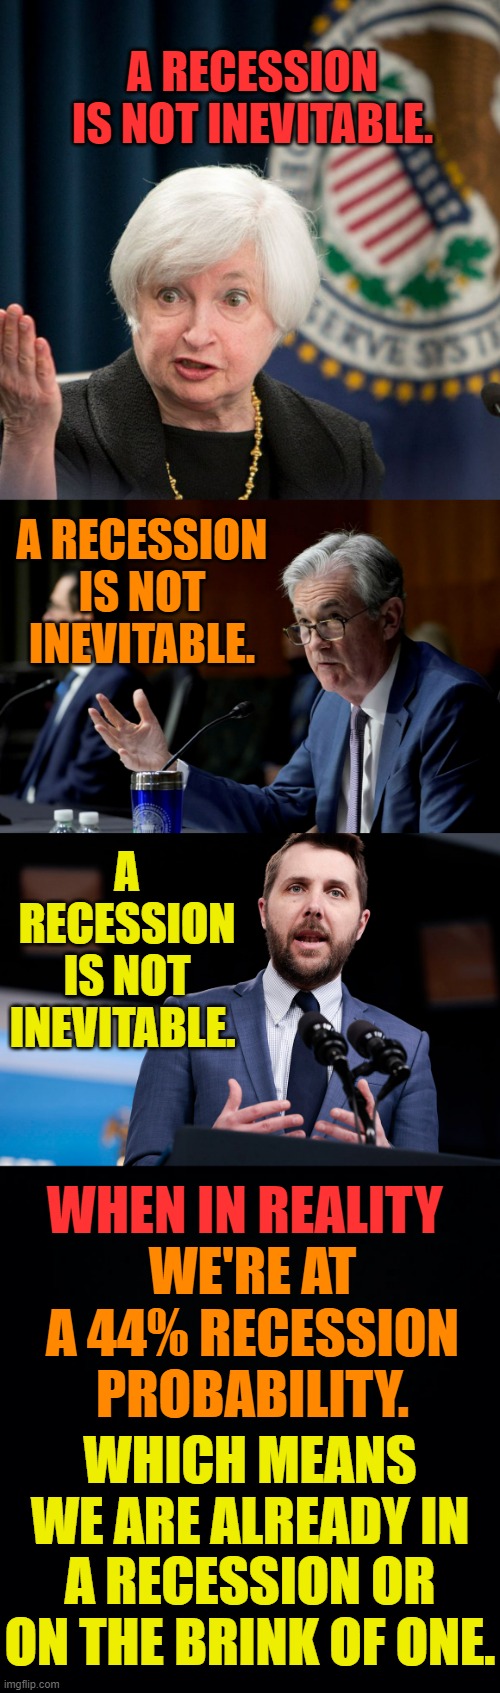 Remember The Inflation Is Transitory Line? Well...Here We Go Again | A RECESSION IS NOT INEVITABLE. A RECESSION IS NOT INEVITABLE. A RECESSION IS NOT INEVITABLE. WHEN IN REALITY; WE'RE AT A 44% RECESSION PROBABILITY. WHICH MEANS WE ARE ALREADY IN A RECESSION OR ON THE BRINK OF ONE. | image tagged in memes,politics,finance,down,its not going to happen,reality check | made w/ Imgflip meme maker